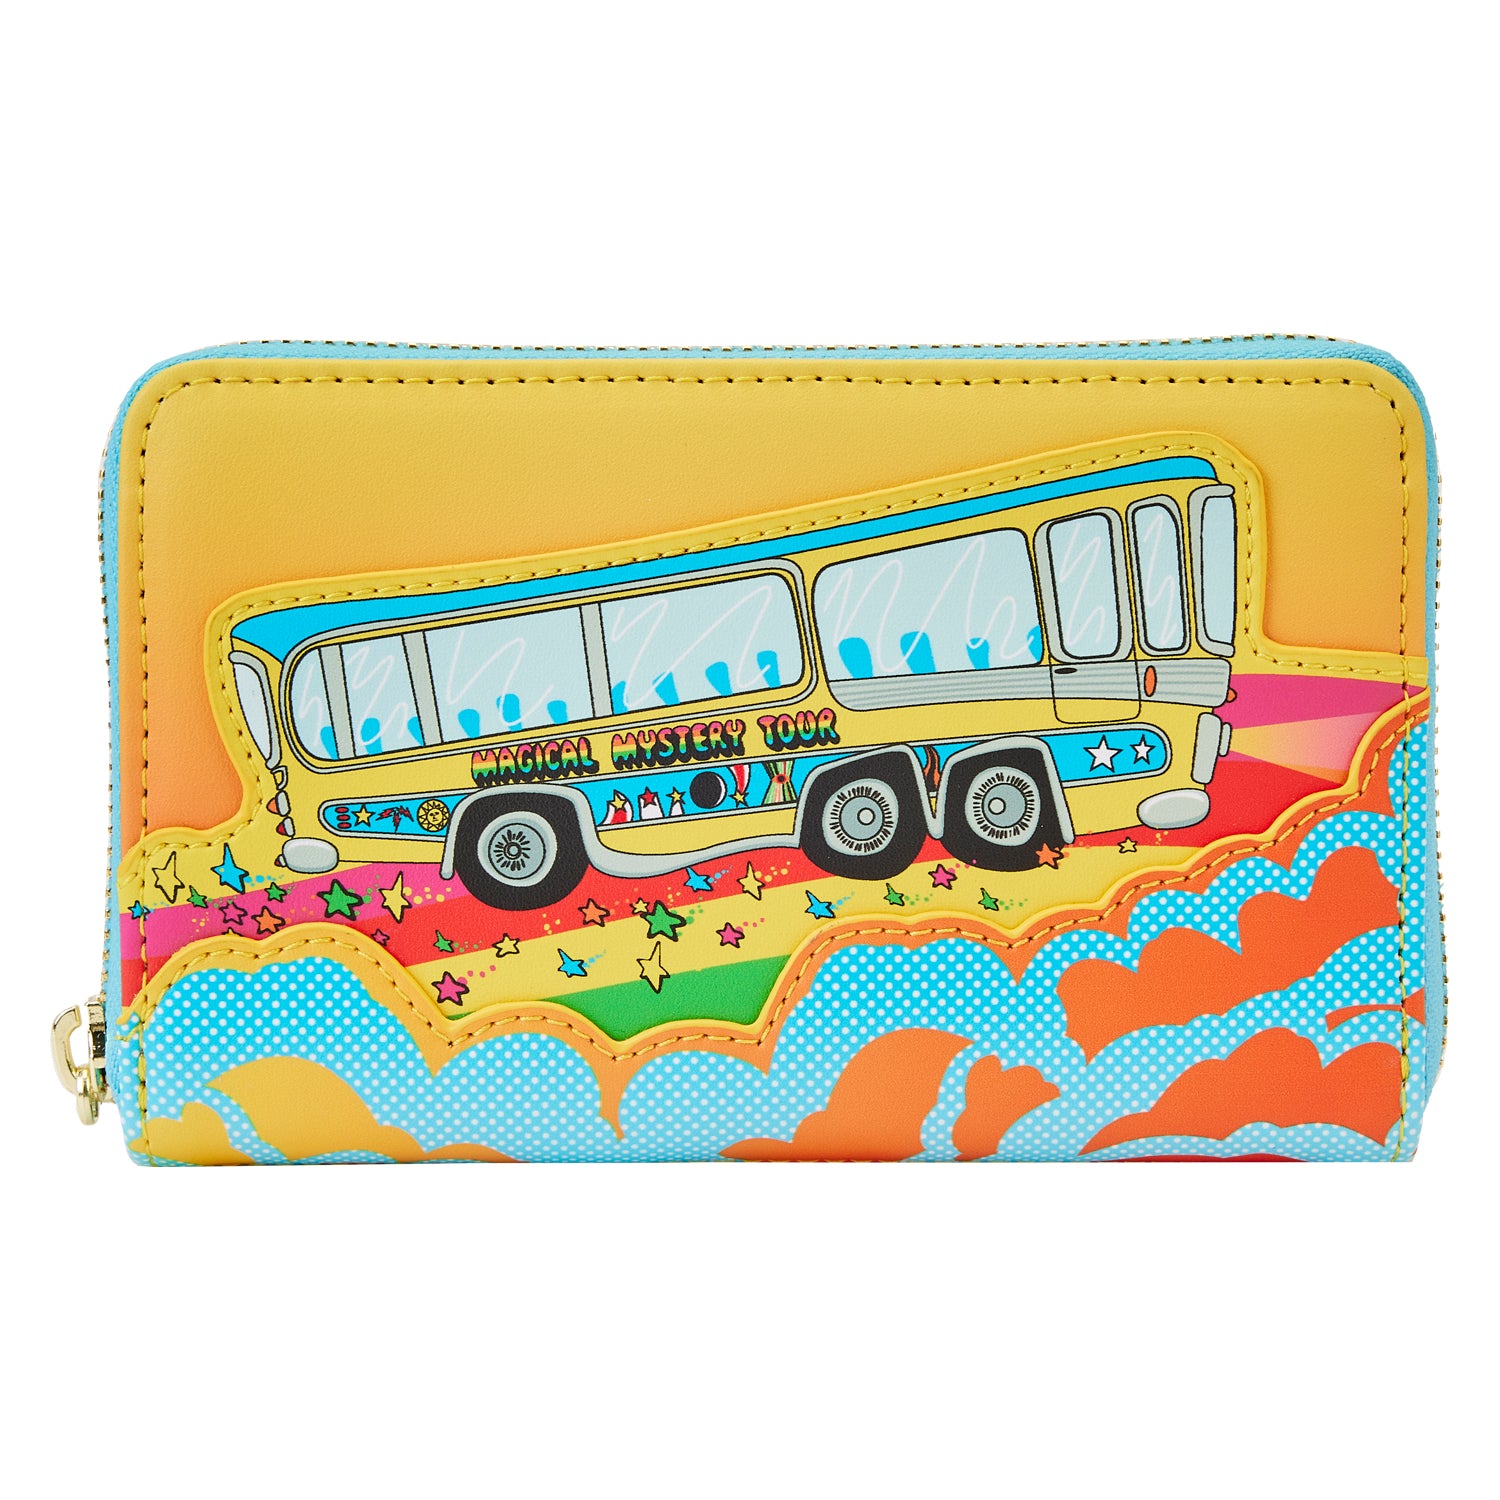 Loungefly x The Beatles Magical Mystery Tour Bus Wallet